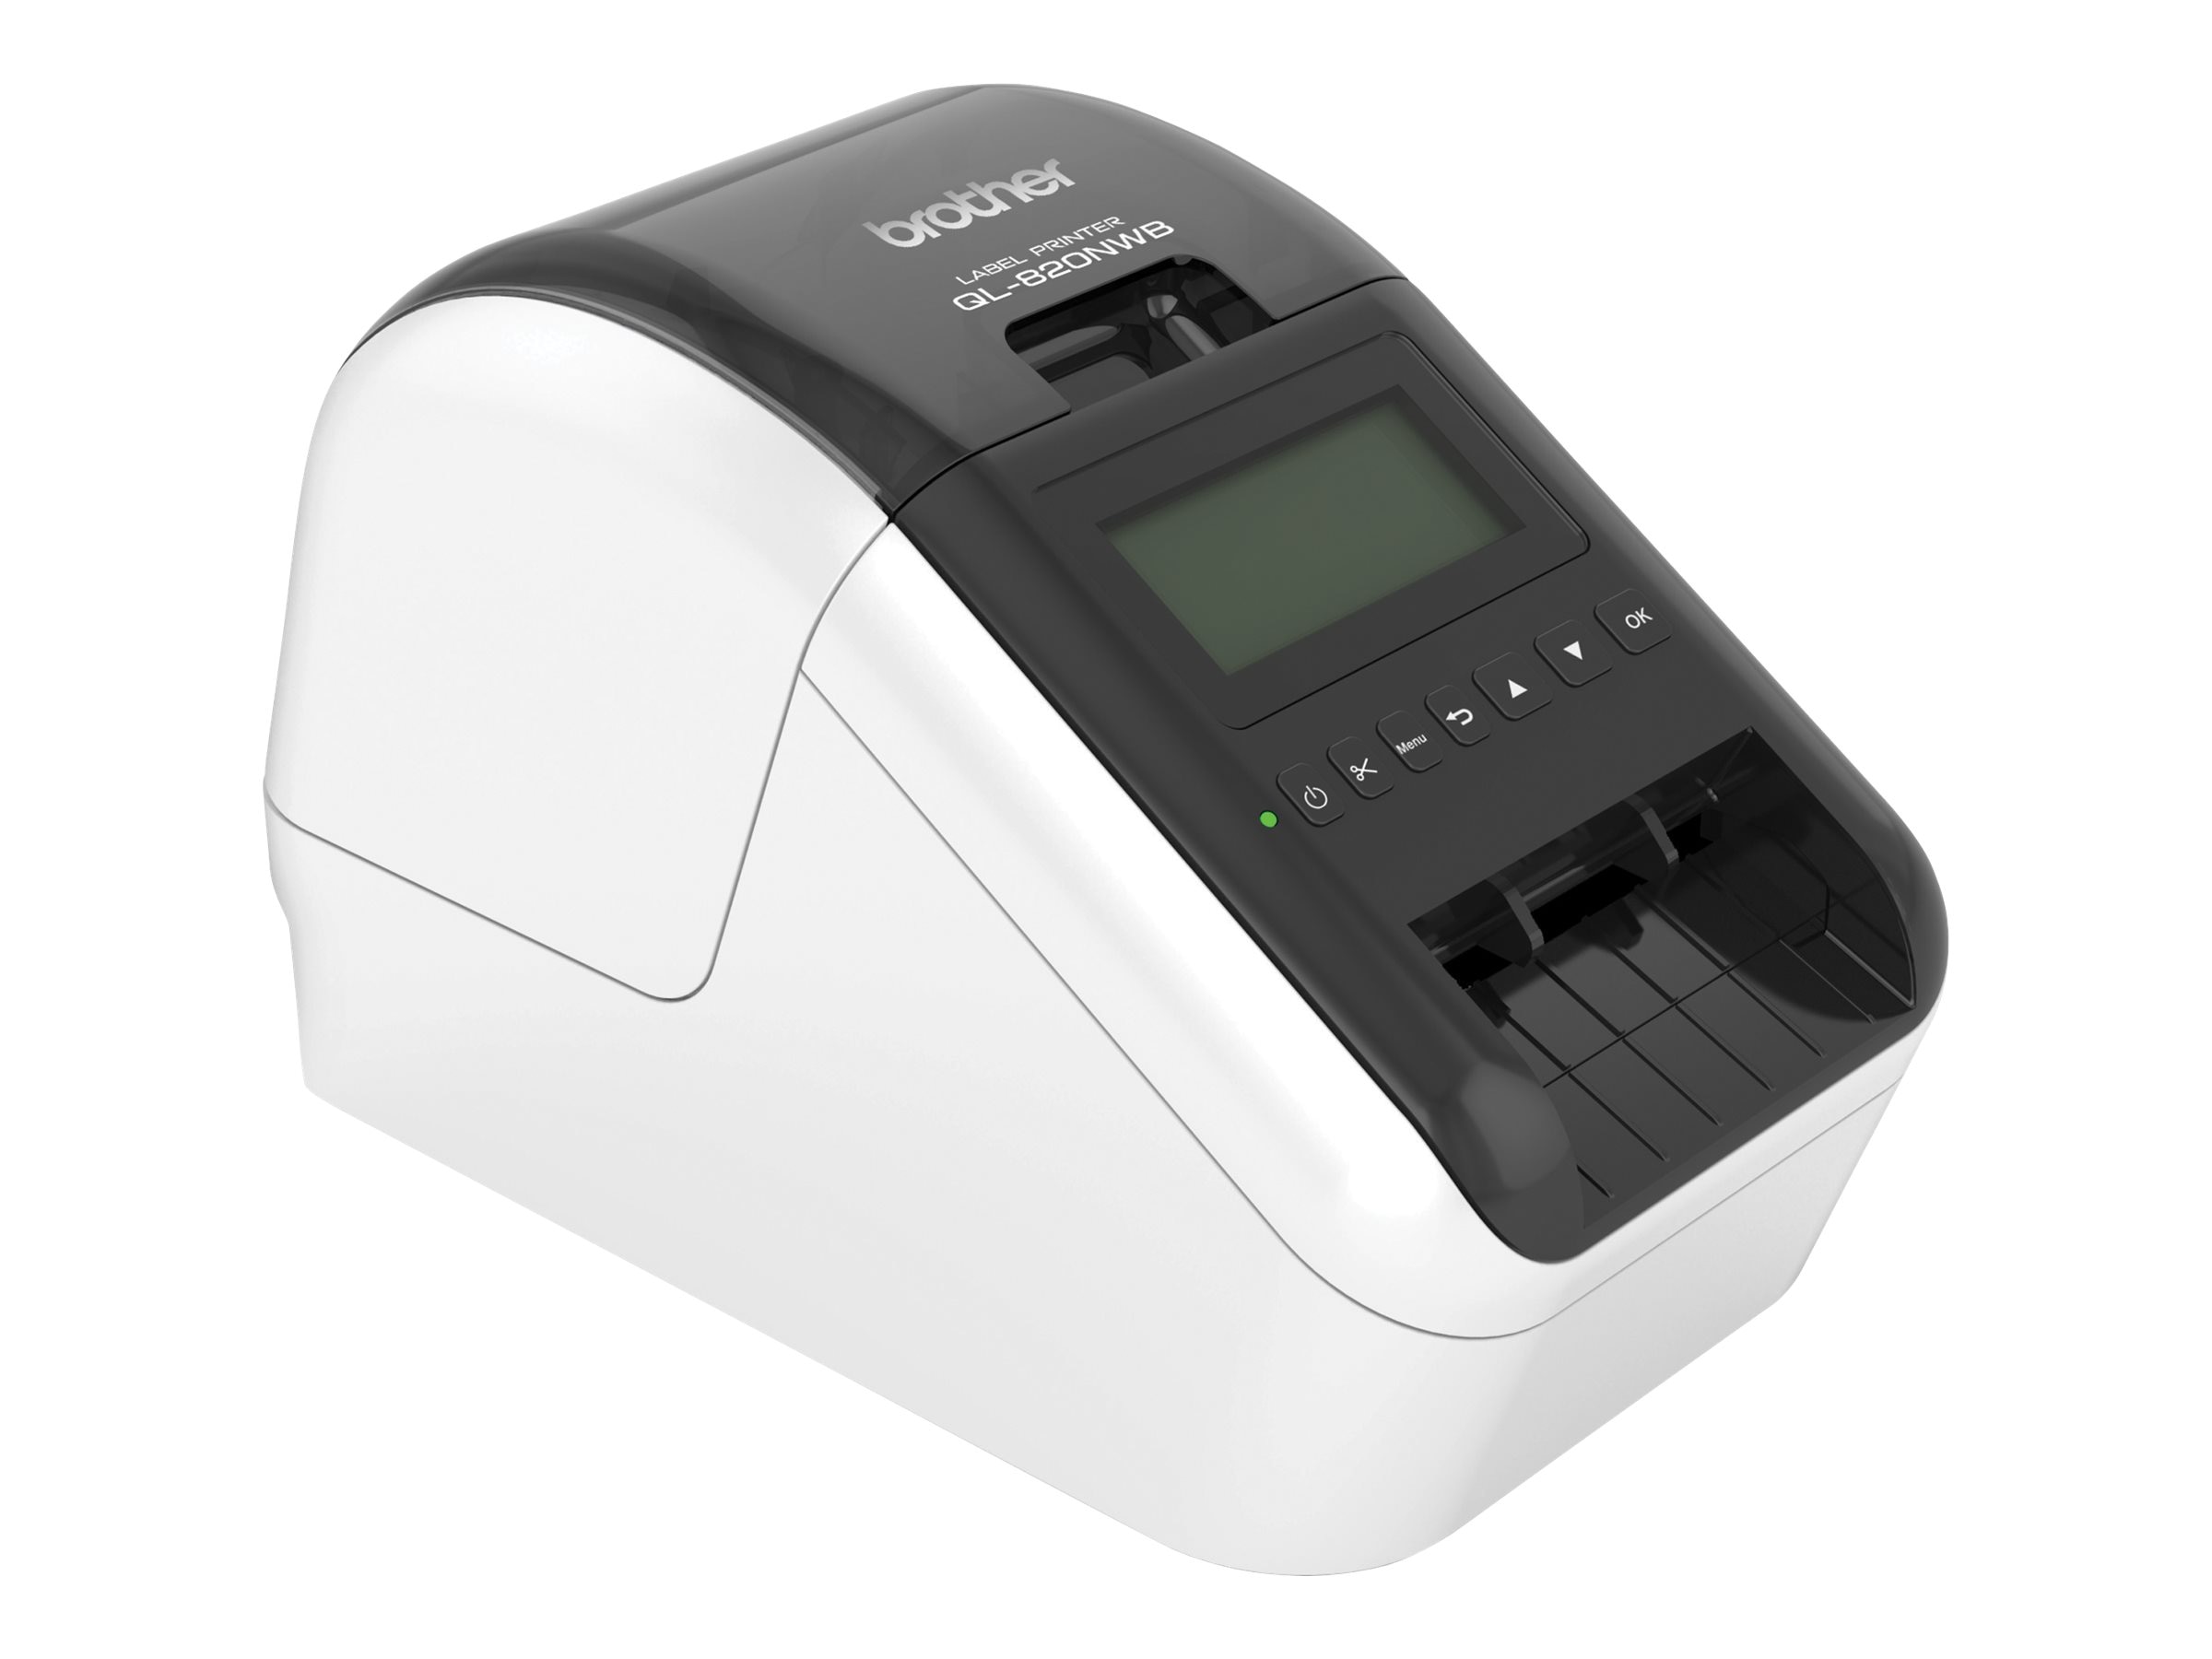 Wireless Shipping Label Printer AirPrint, Wi-Fi Print from iPhone, iPad, Mac, Windows, Chromebook, Android - 1